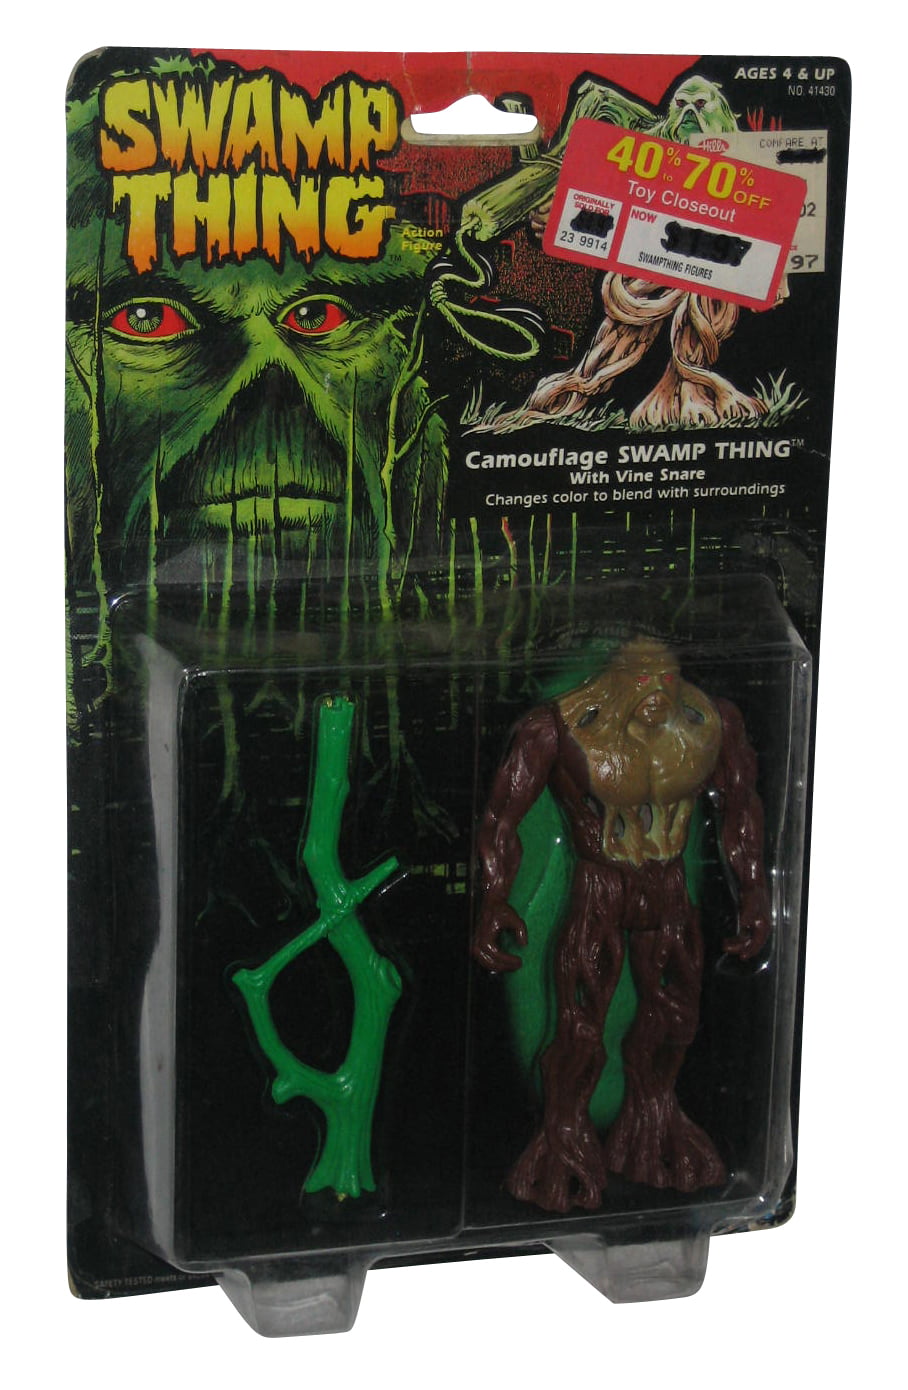 1990 Kenner Tonka Camouflage Swamp Thing With Vine Snare Action Figure A21 for sale online